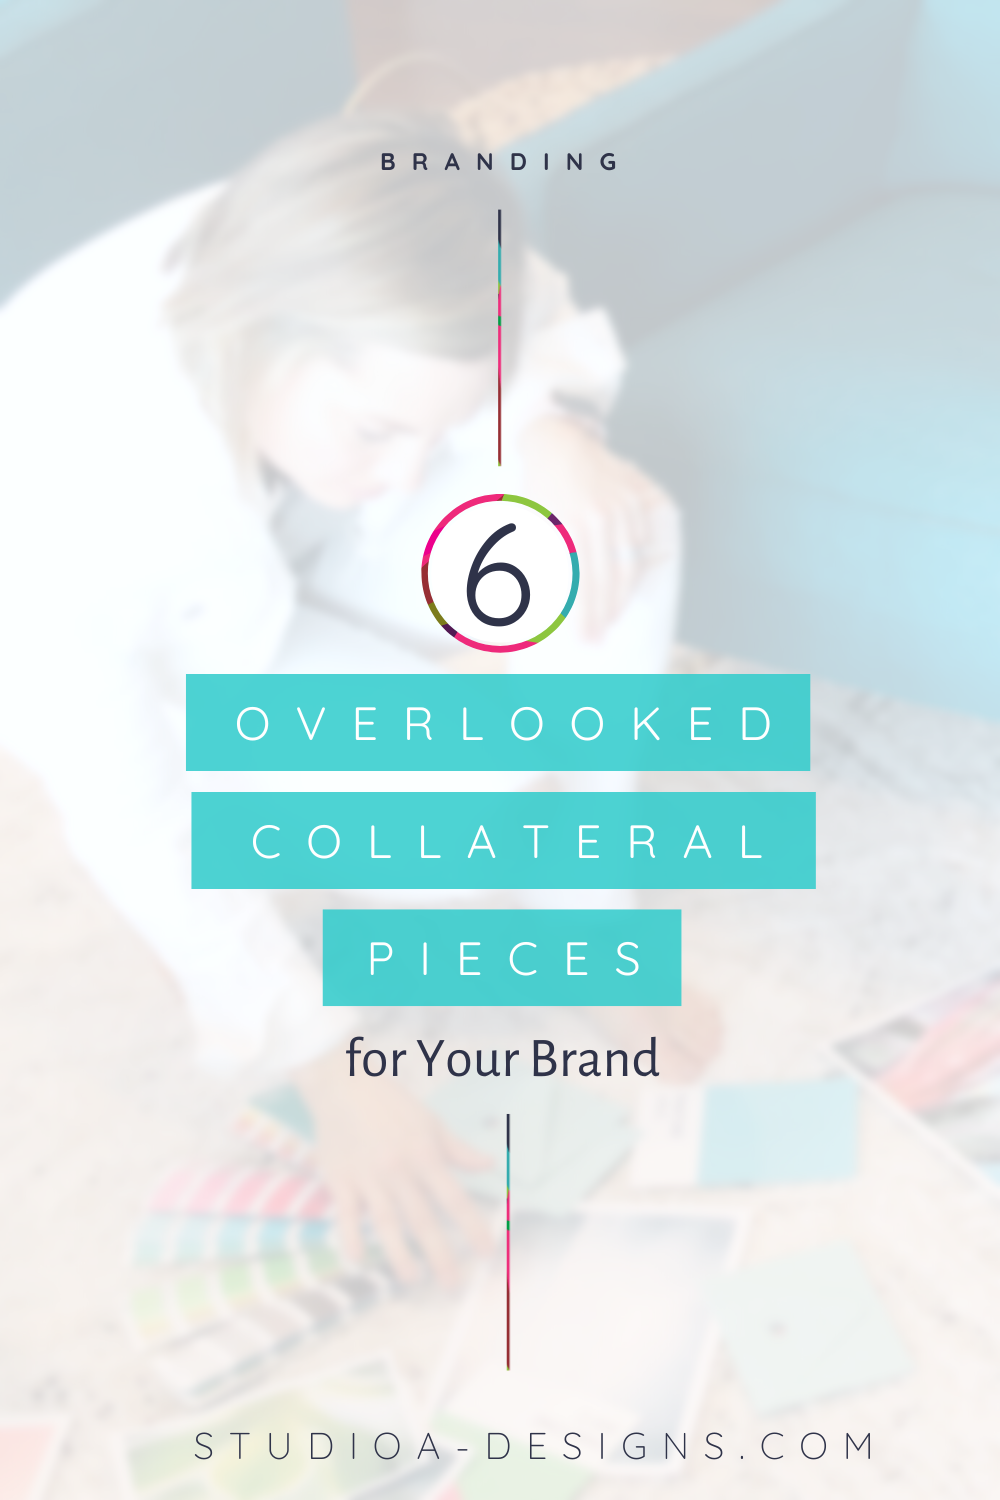 Six Overlooked Collateral Pieces for your Brand